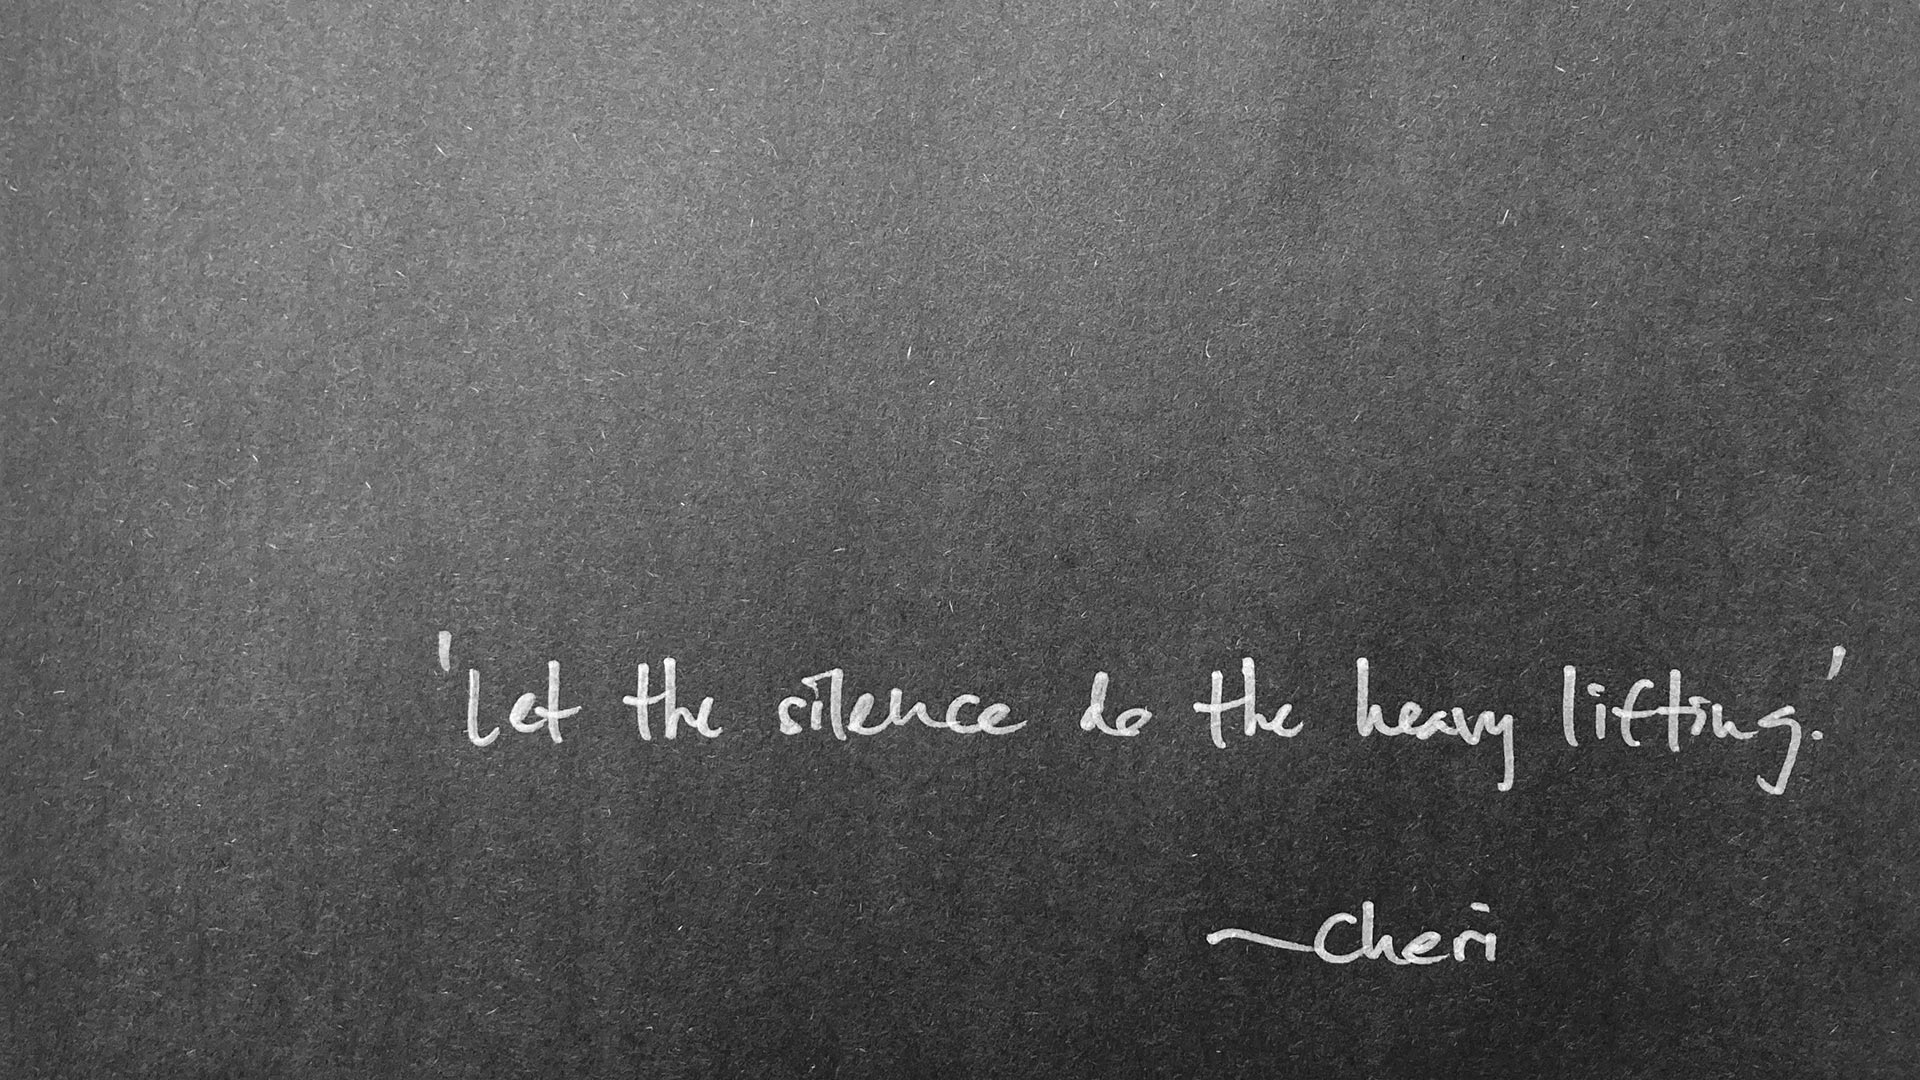 'Let the silence do the heavy lifting' quote